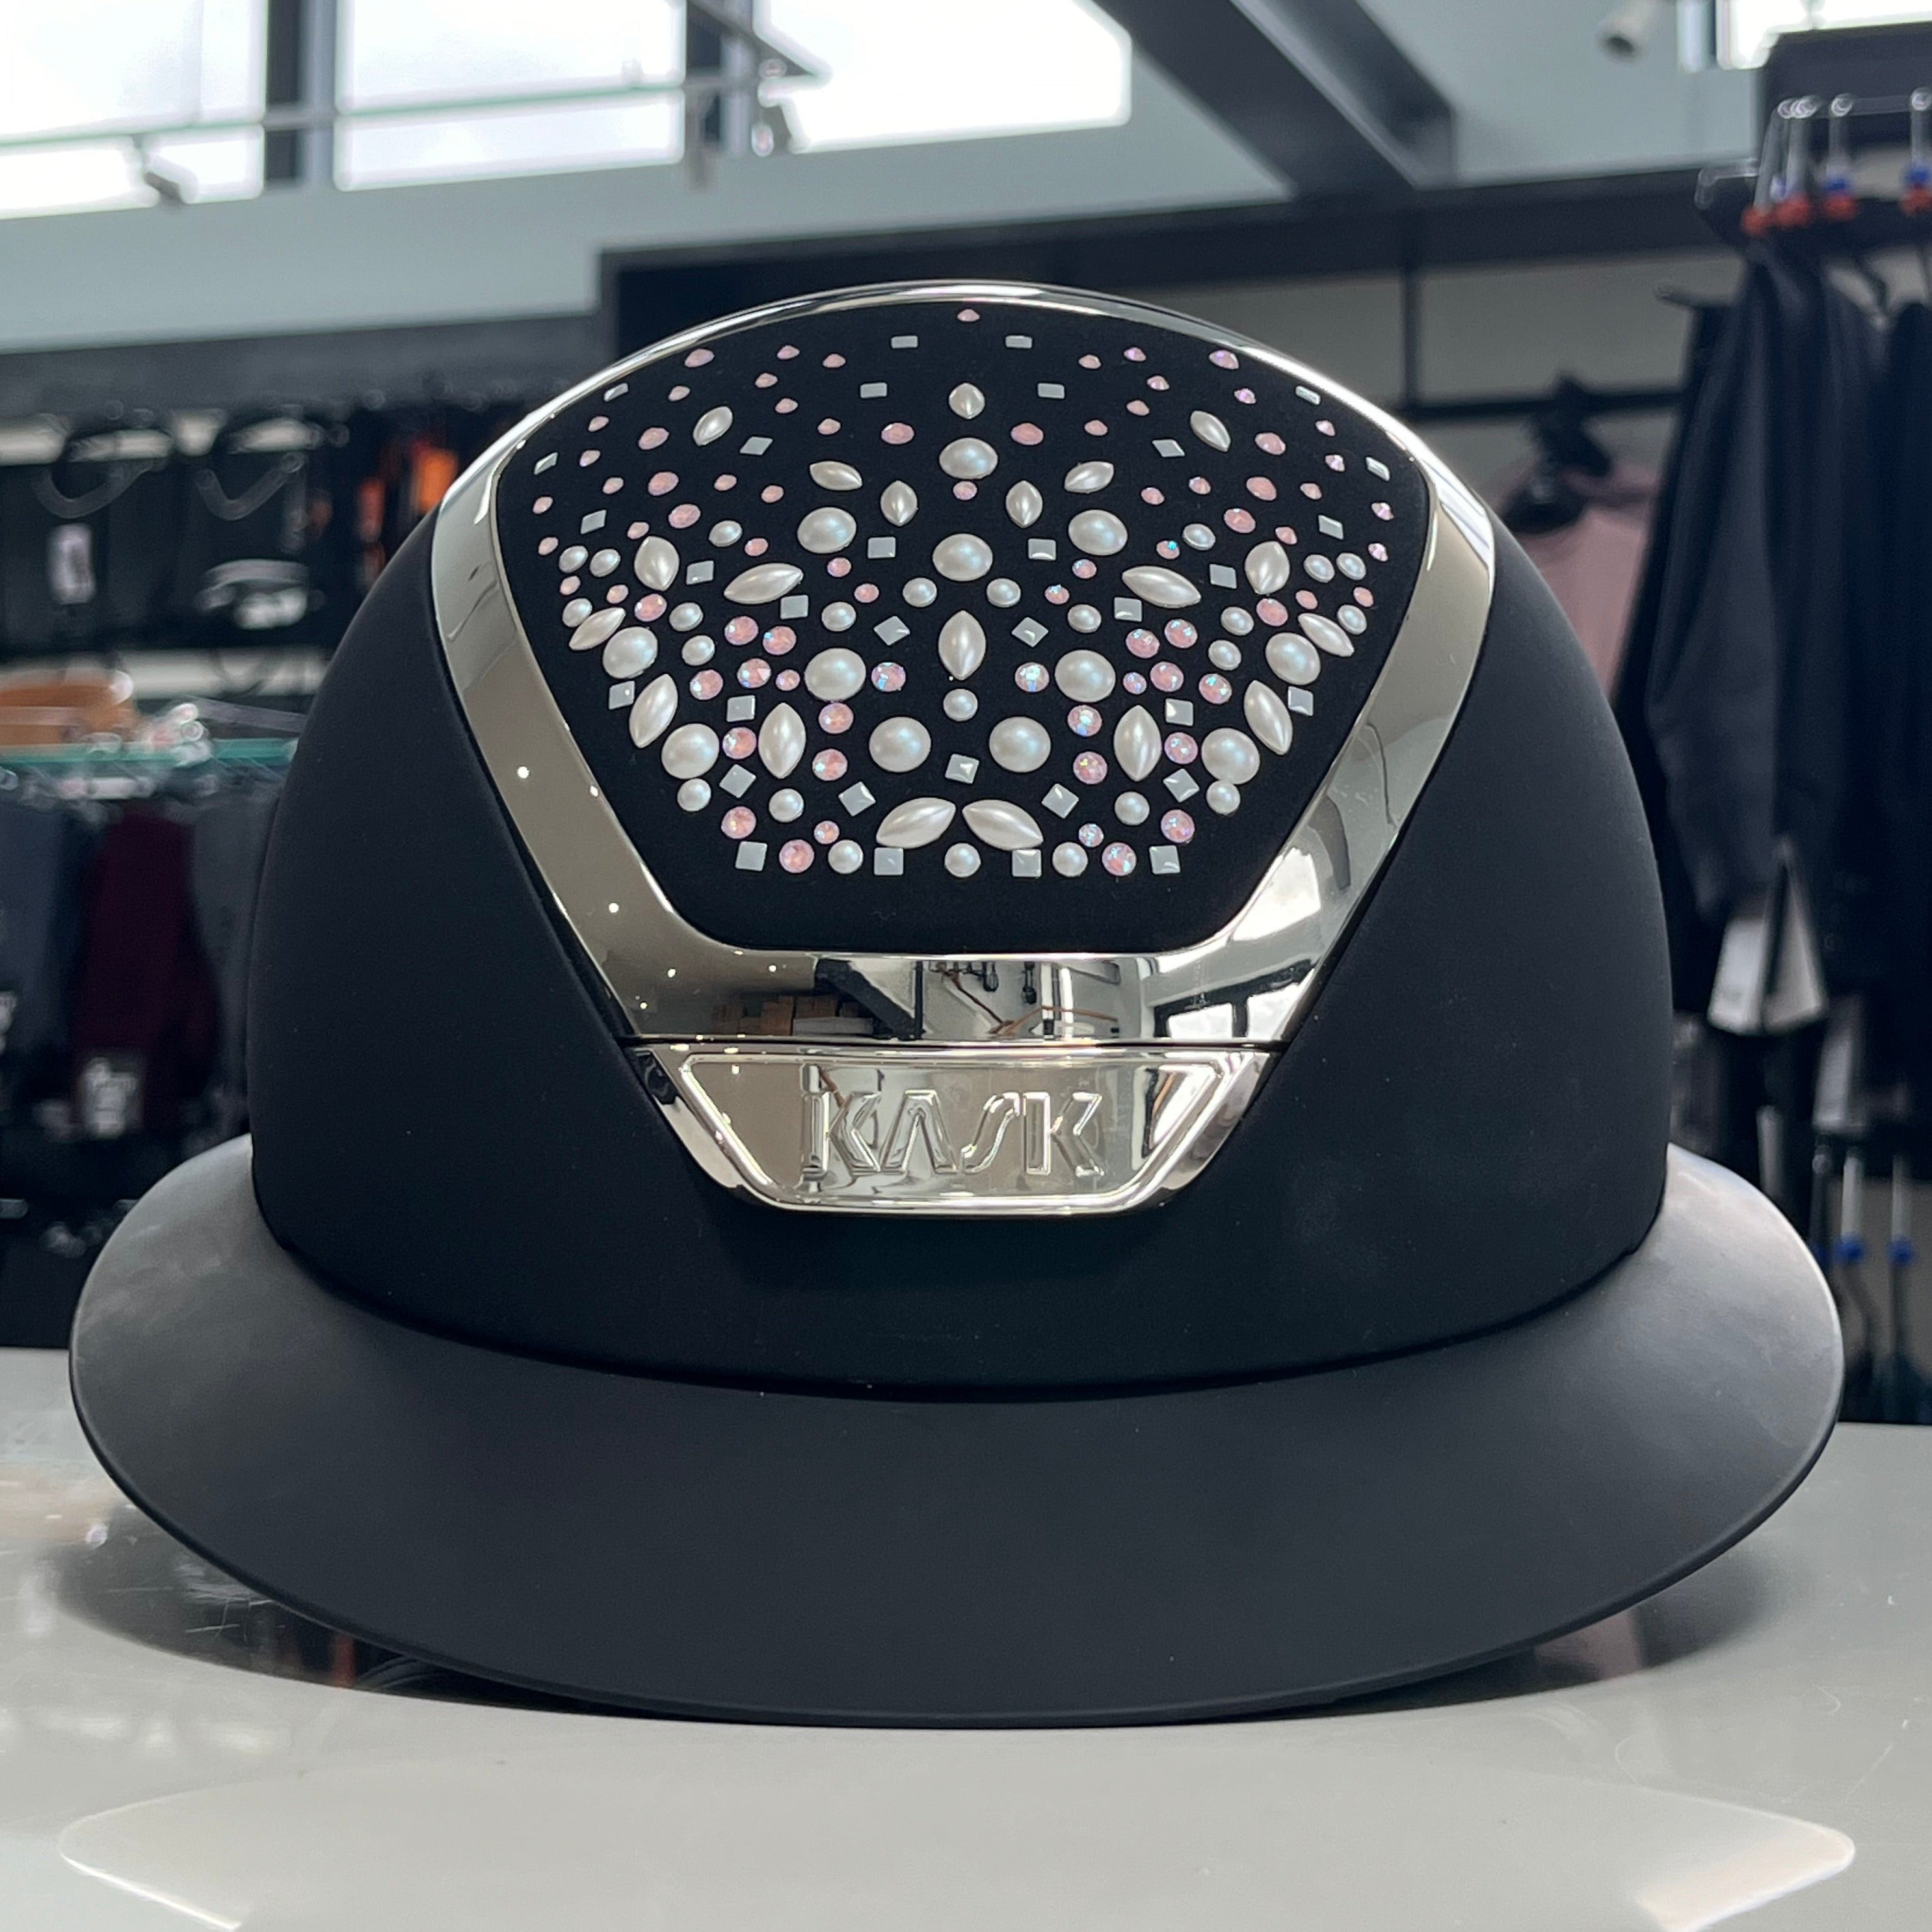 Kask Star Lady Swarovski Pearls Rose Chrome Black S- in stock and ready to ship!